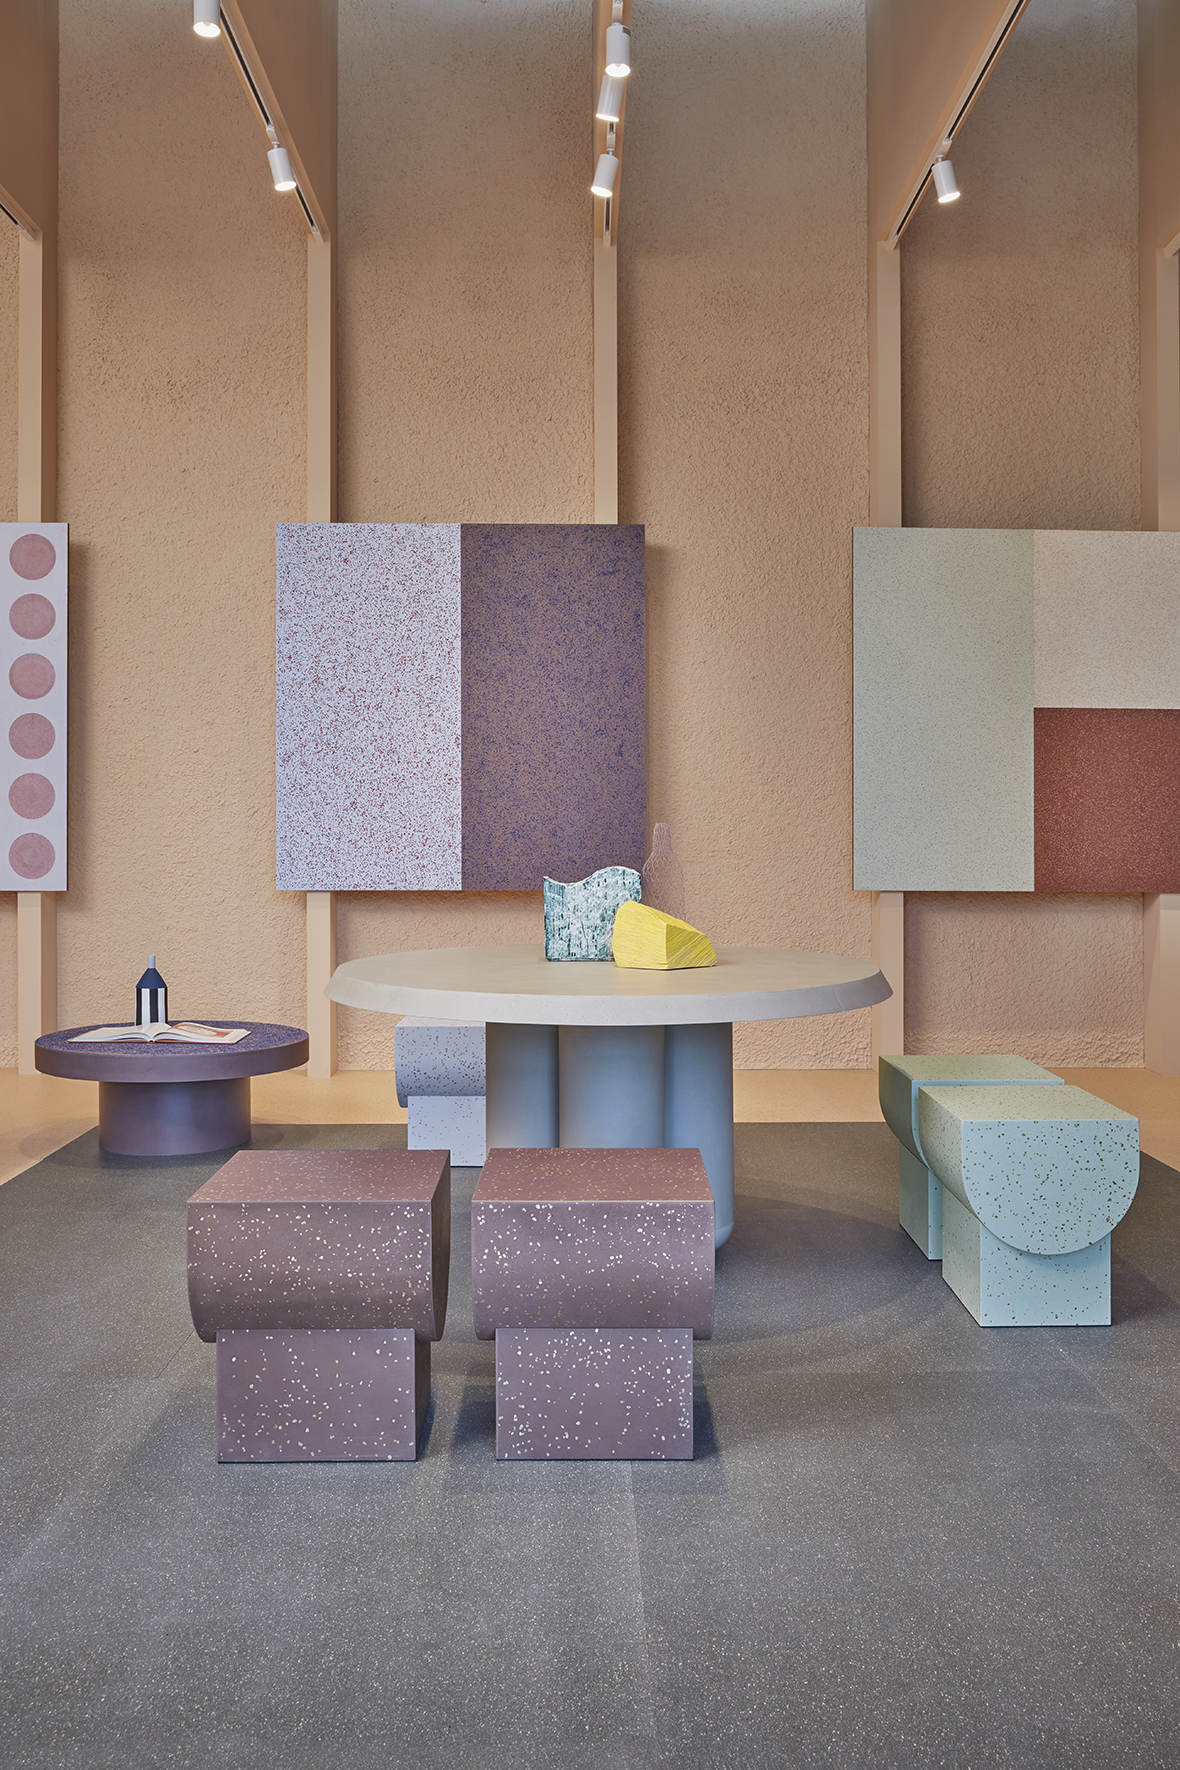 showroom featuring pastel, geometric tables, stools, and paintings